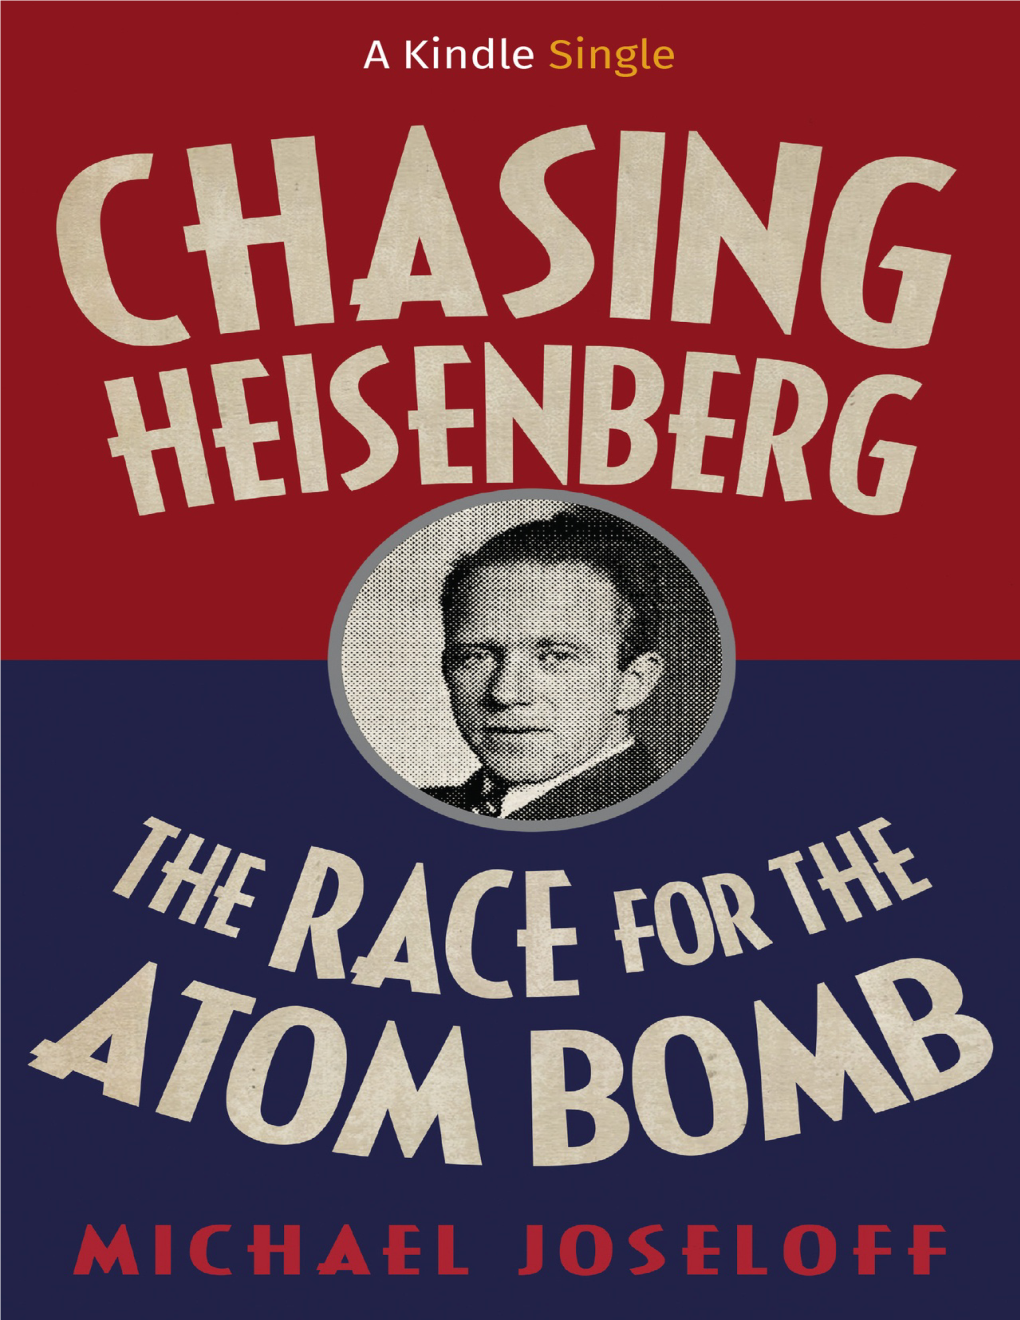 The Race for the Atom Bomb